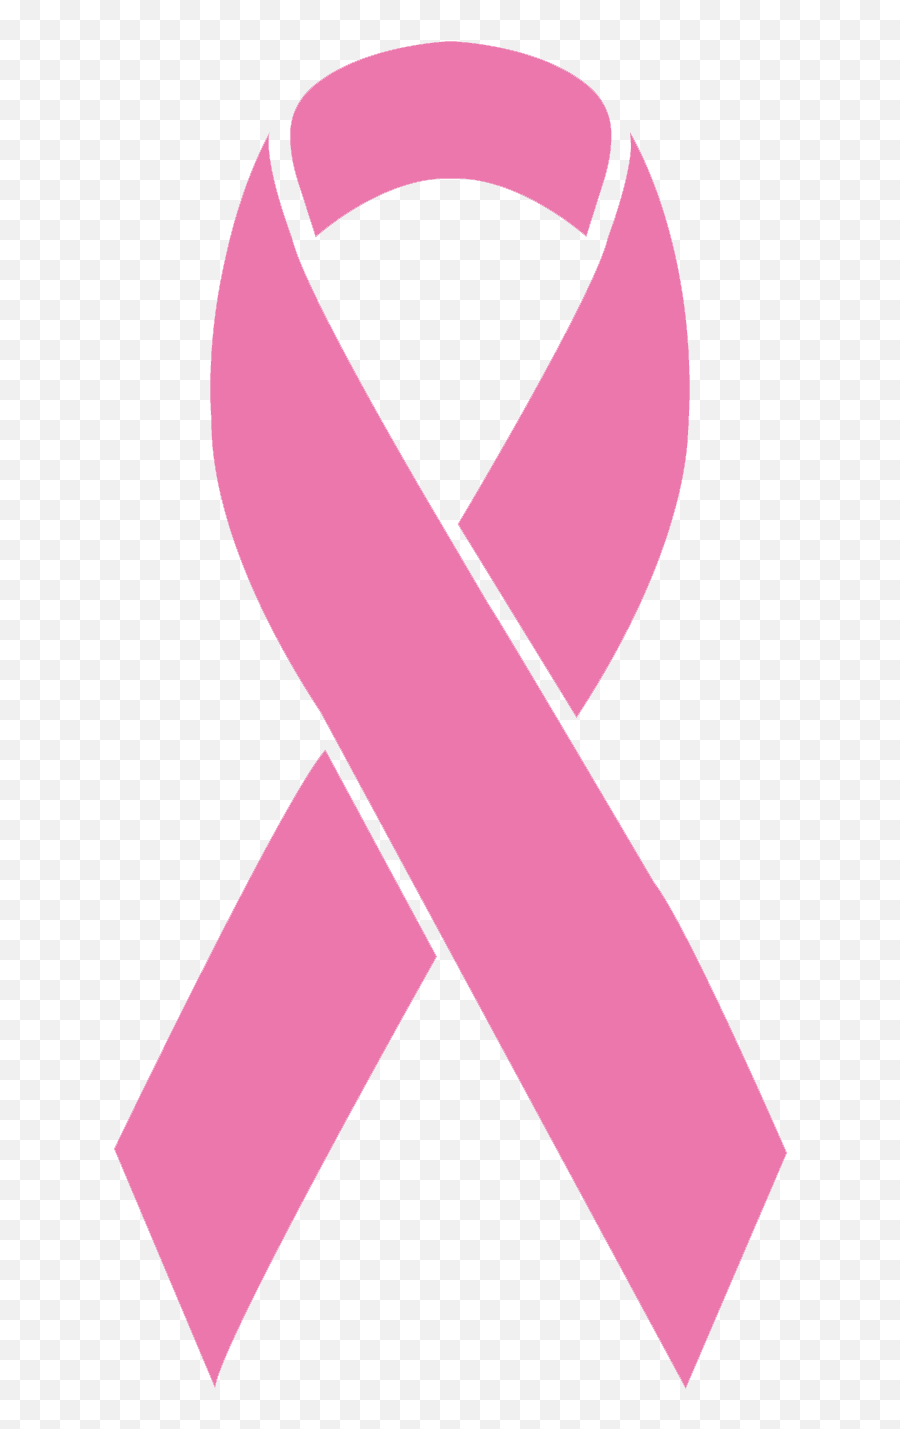 Download Specials In Honor Of Breast Cancer Awareness Month On Breast Cancer Ribbon Svg Png Awareness Ribbon Png Free Transparent Png Images Pngaaa Com